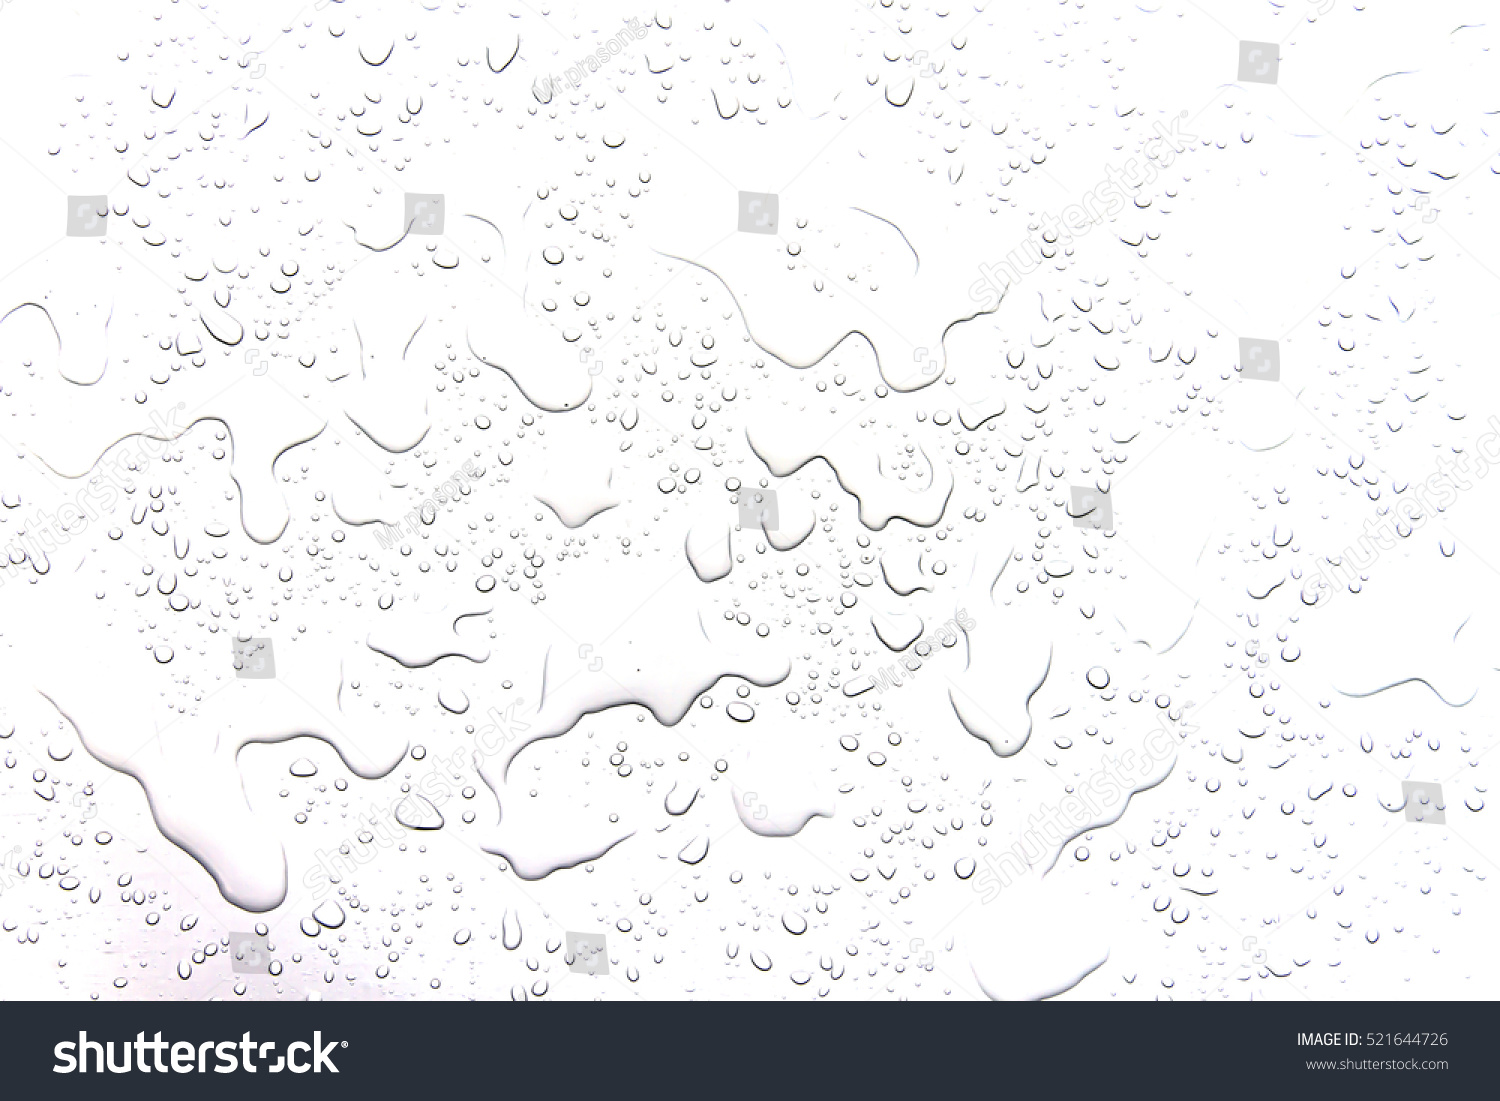 The concept of water drops on a white background #521644726